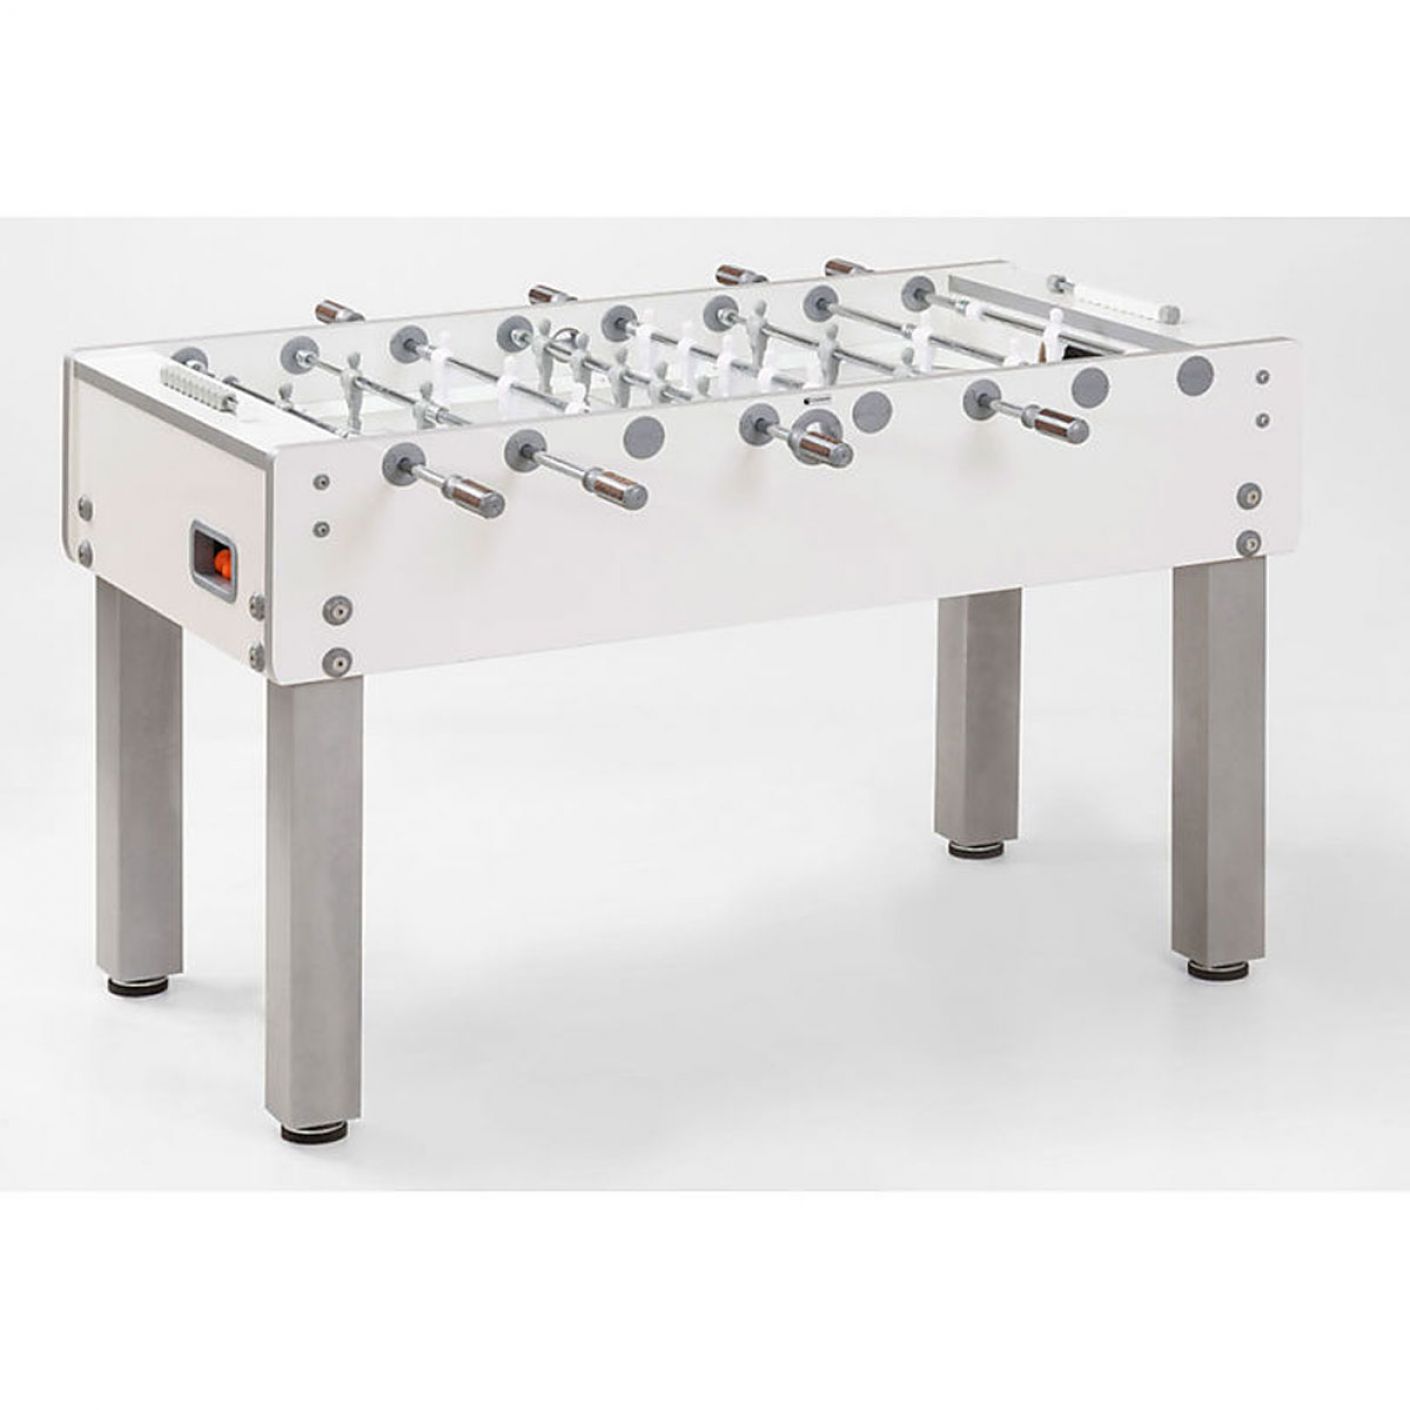 Garlando Table Football G-500 PURE WHITE with retracting temples